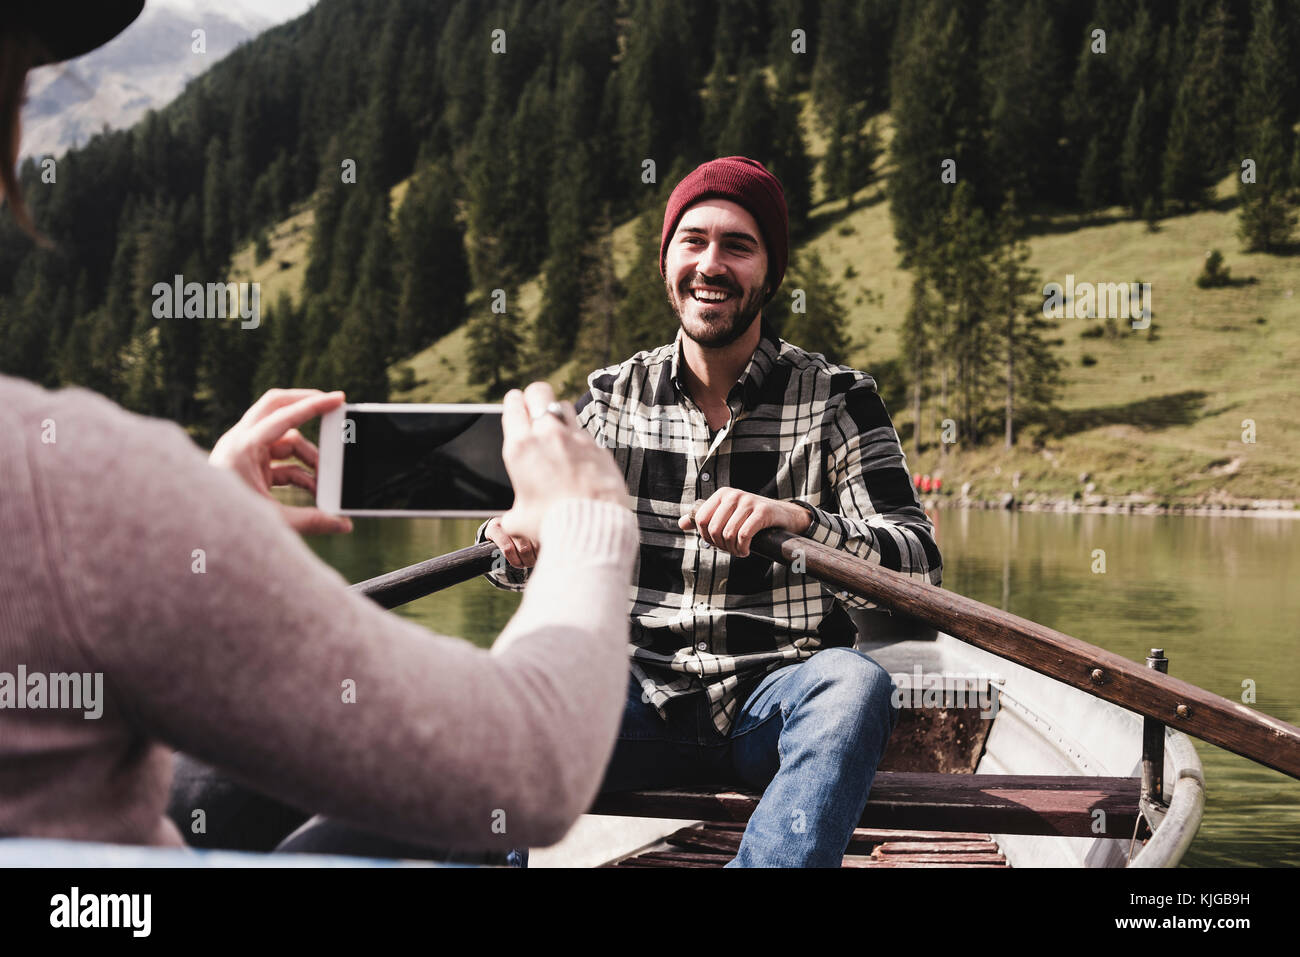 Austria, Tyrol, Alps, woman taking cell phone picture of smiling man in rowing boat on mountain lake Stock Photo